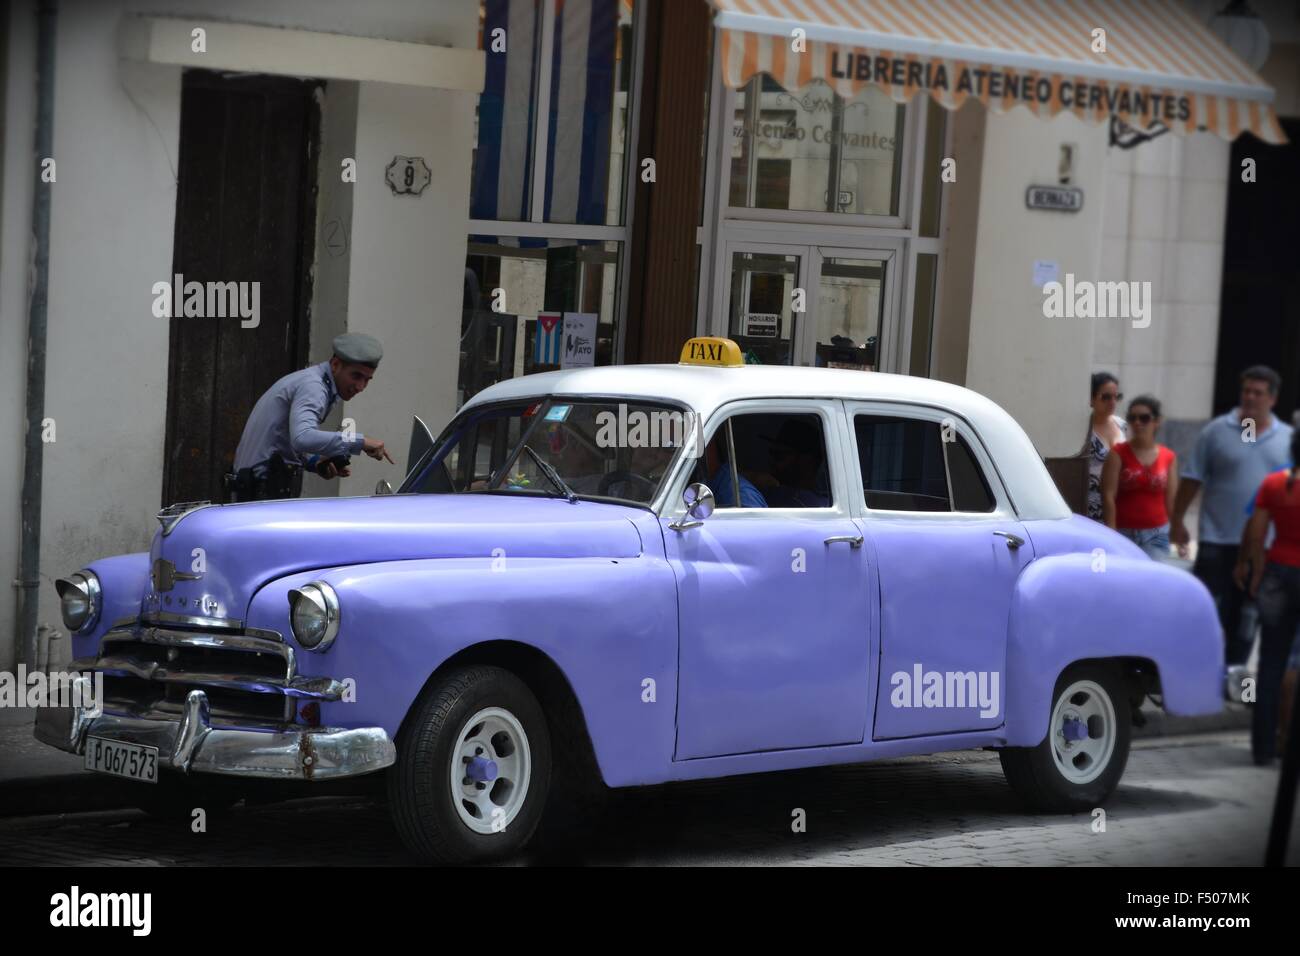 traffic cop speaking to taxi driver of a vintage mauve cab on a street corner in Havana Cuba Stock Photo